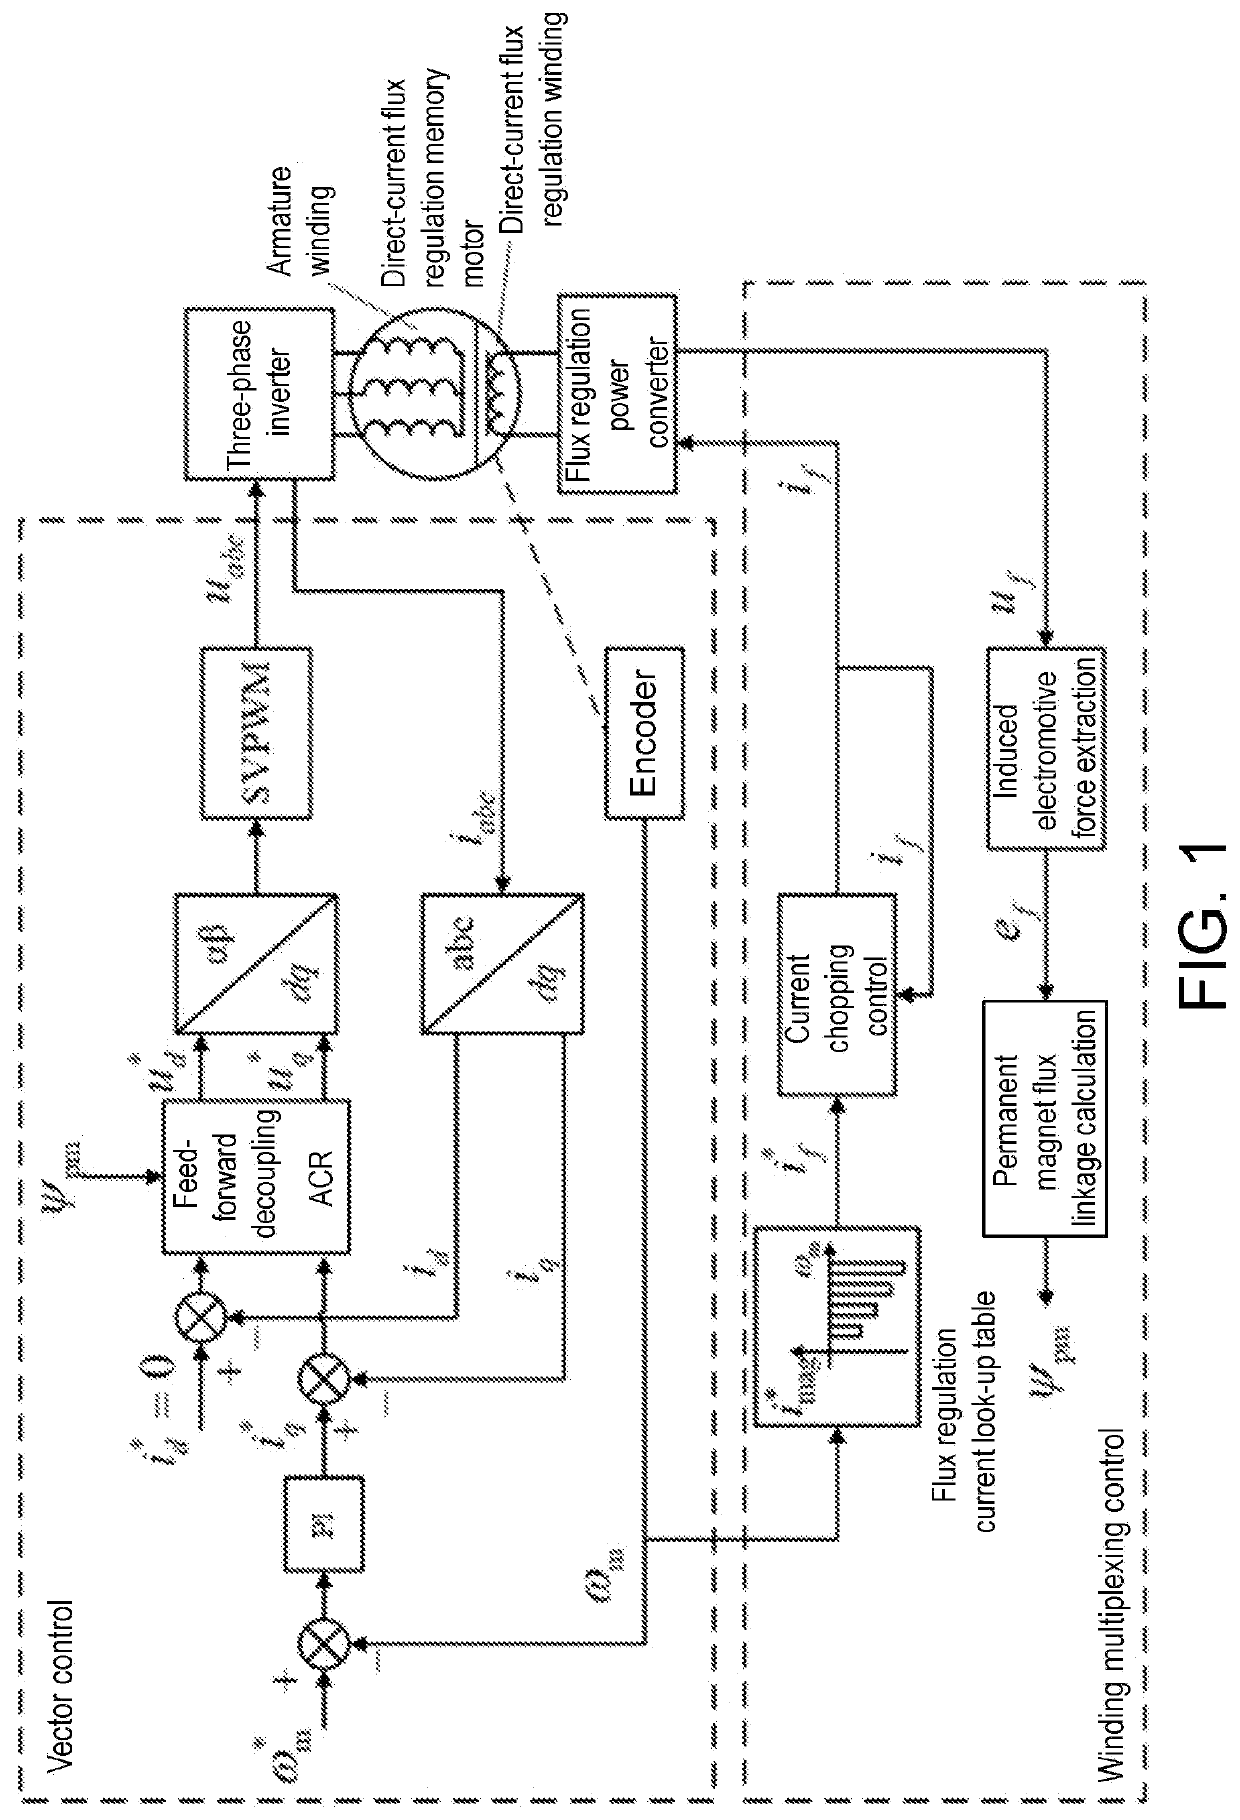 Memory motor winding multiplexing control method and system for flux linkage observation